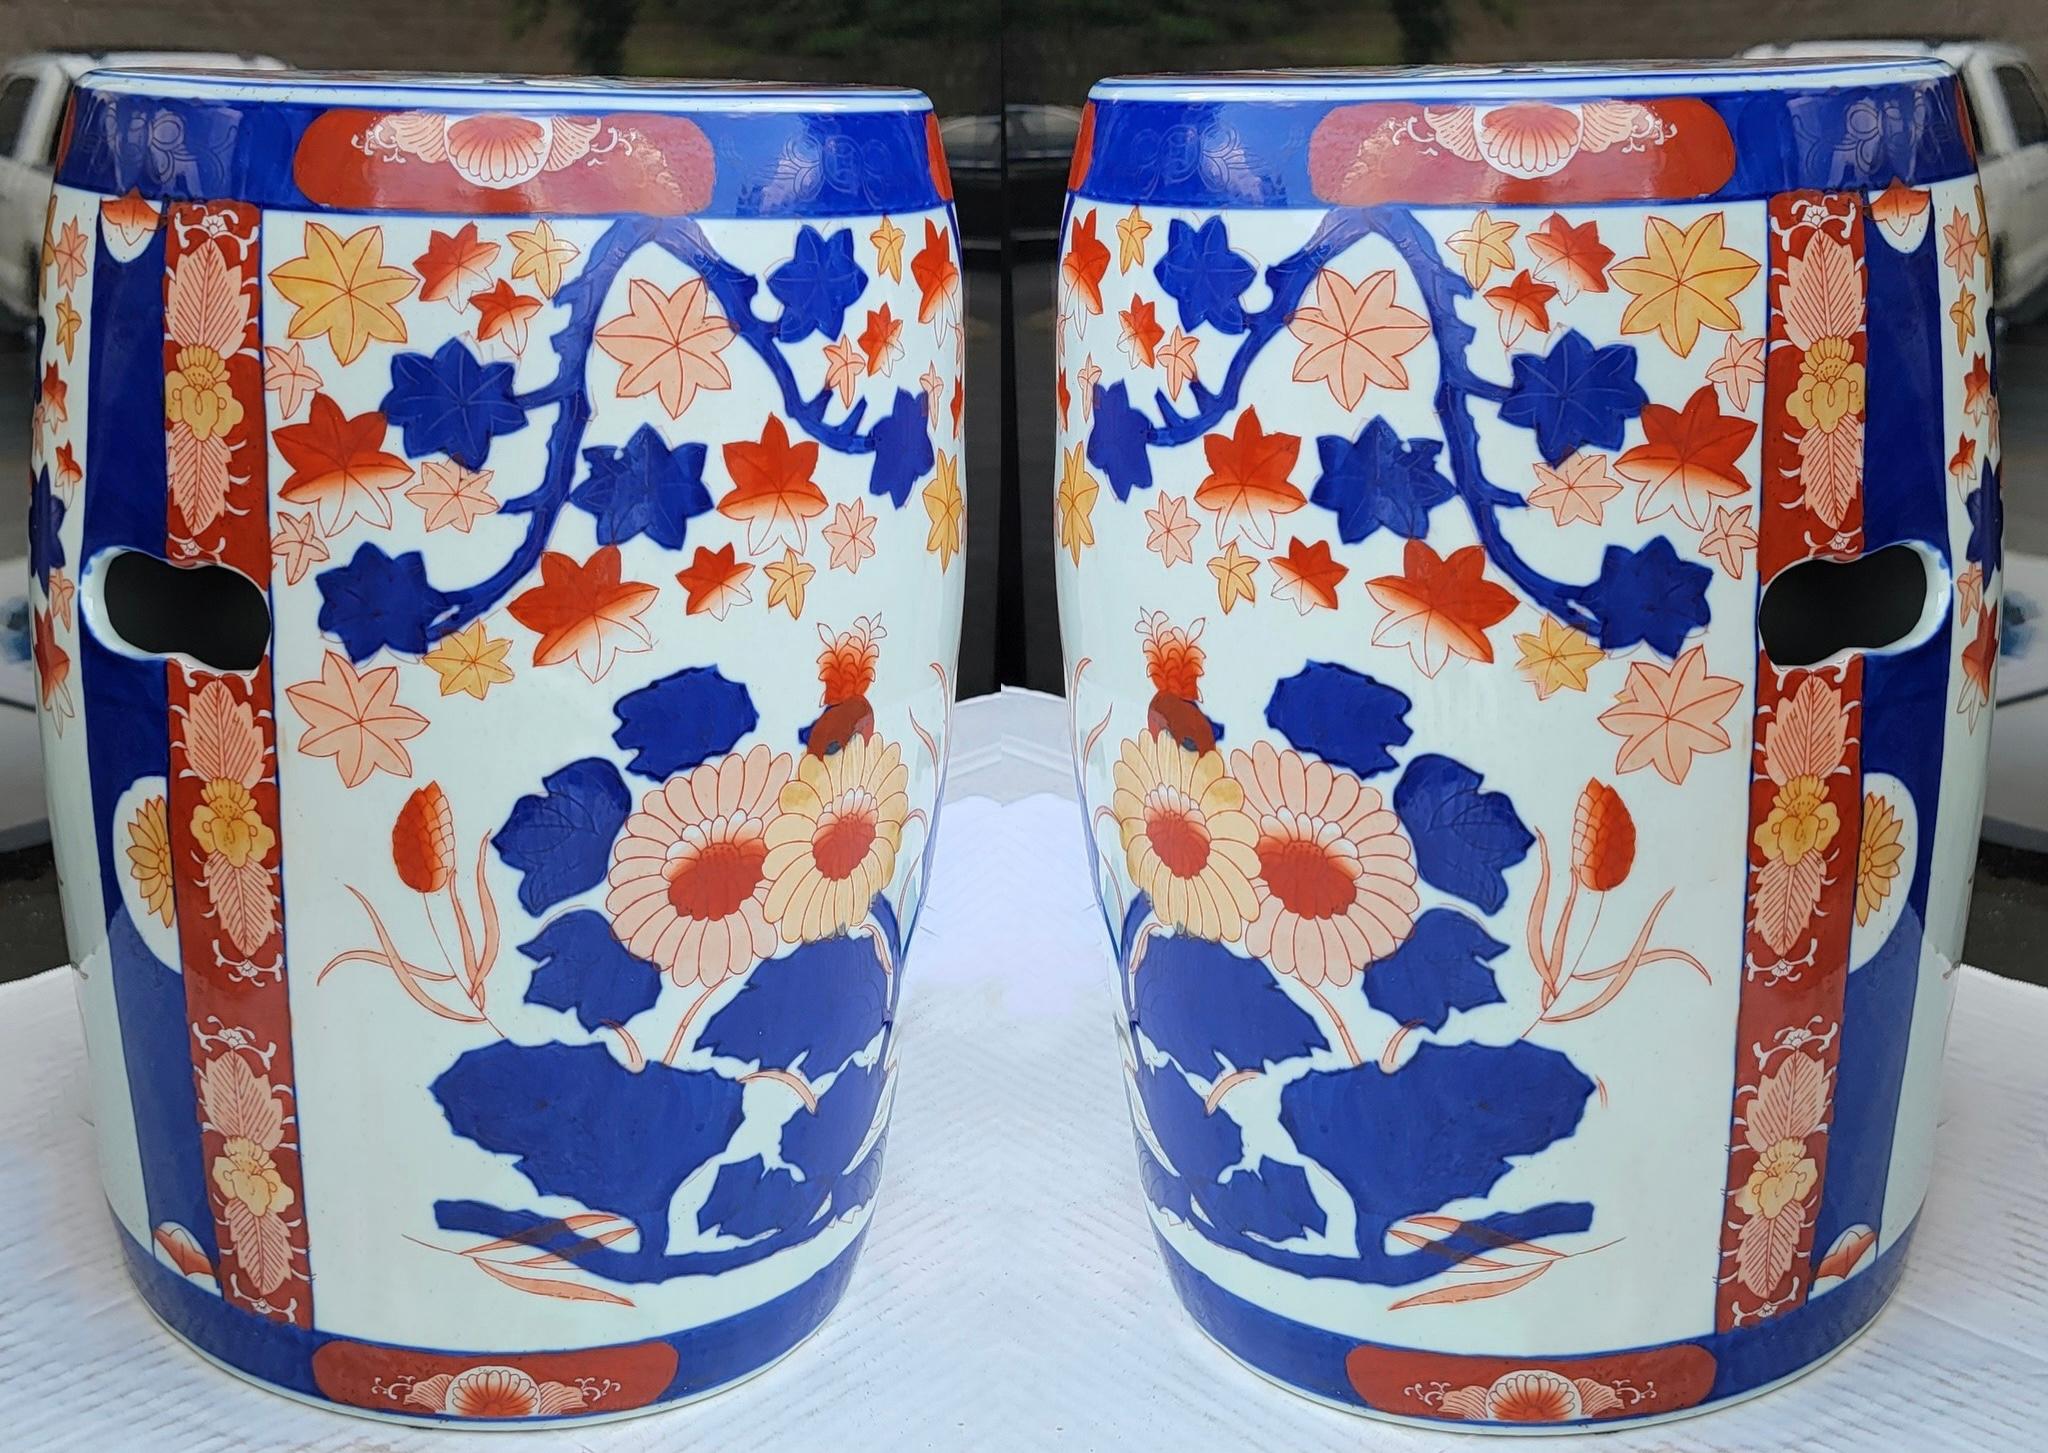 Late 20th Century 20th-C. Chinese Export Imari Style Blue and Orange Garden Seats / Tables, Pair For Sale